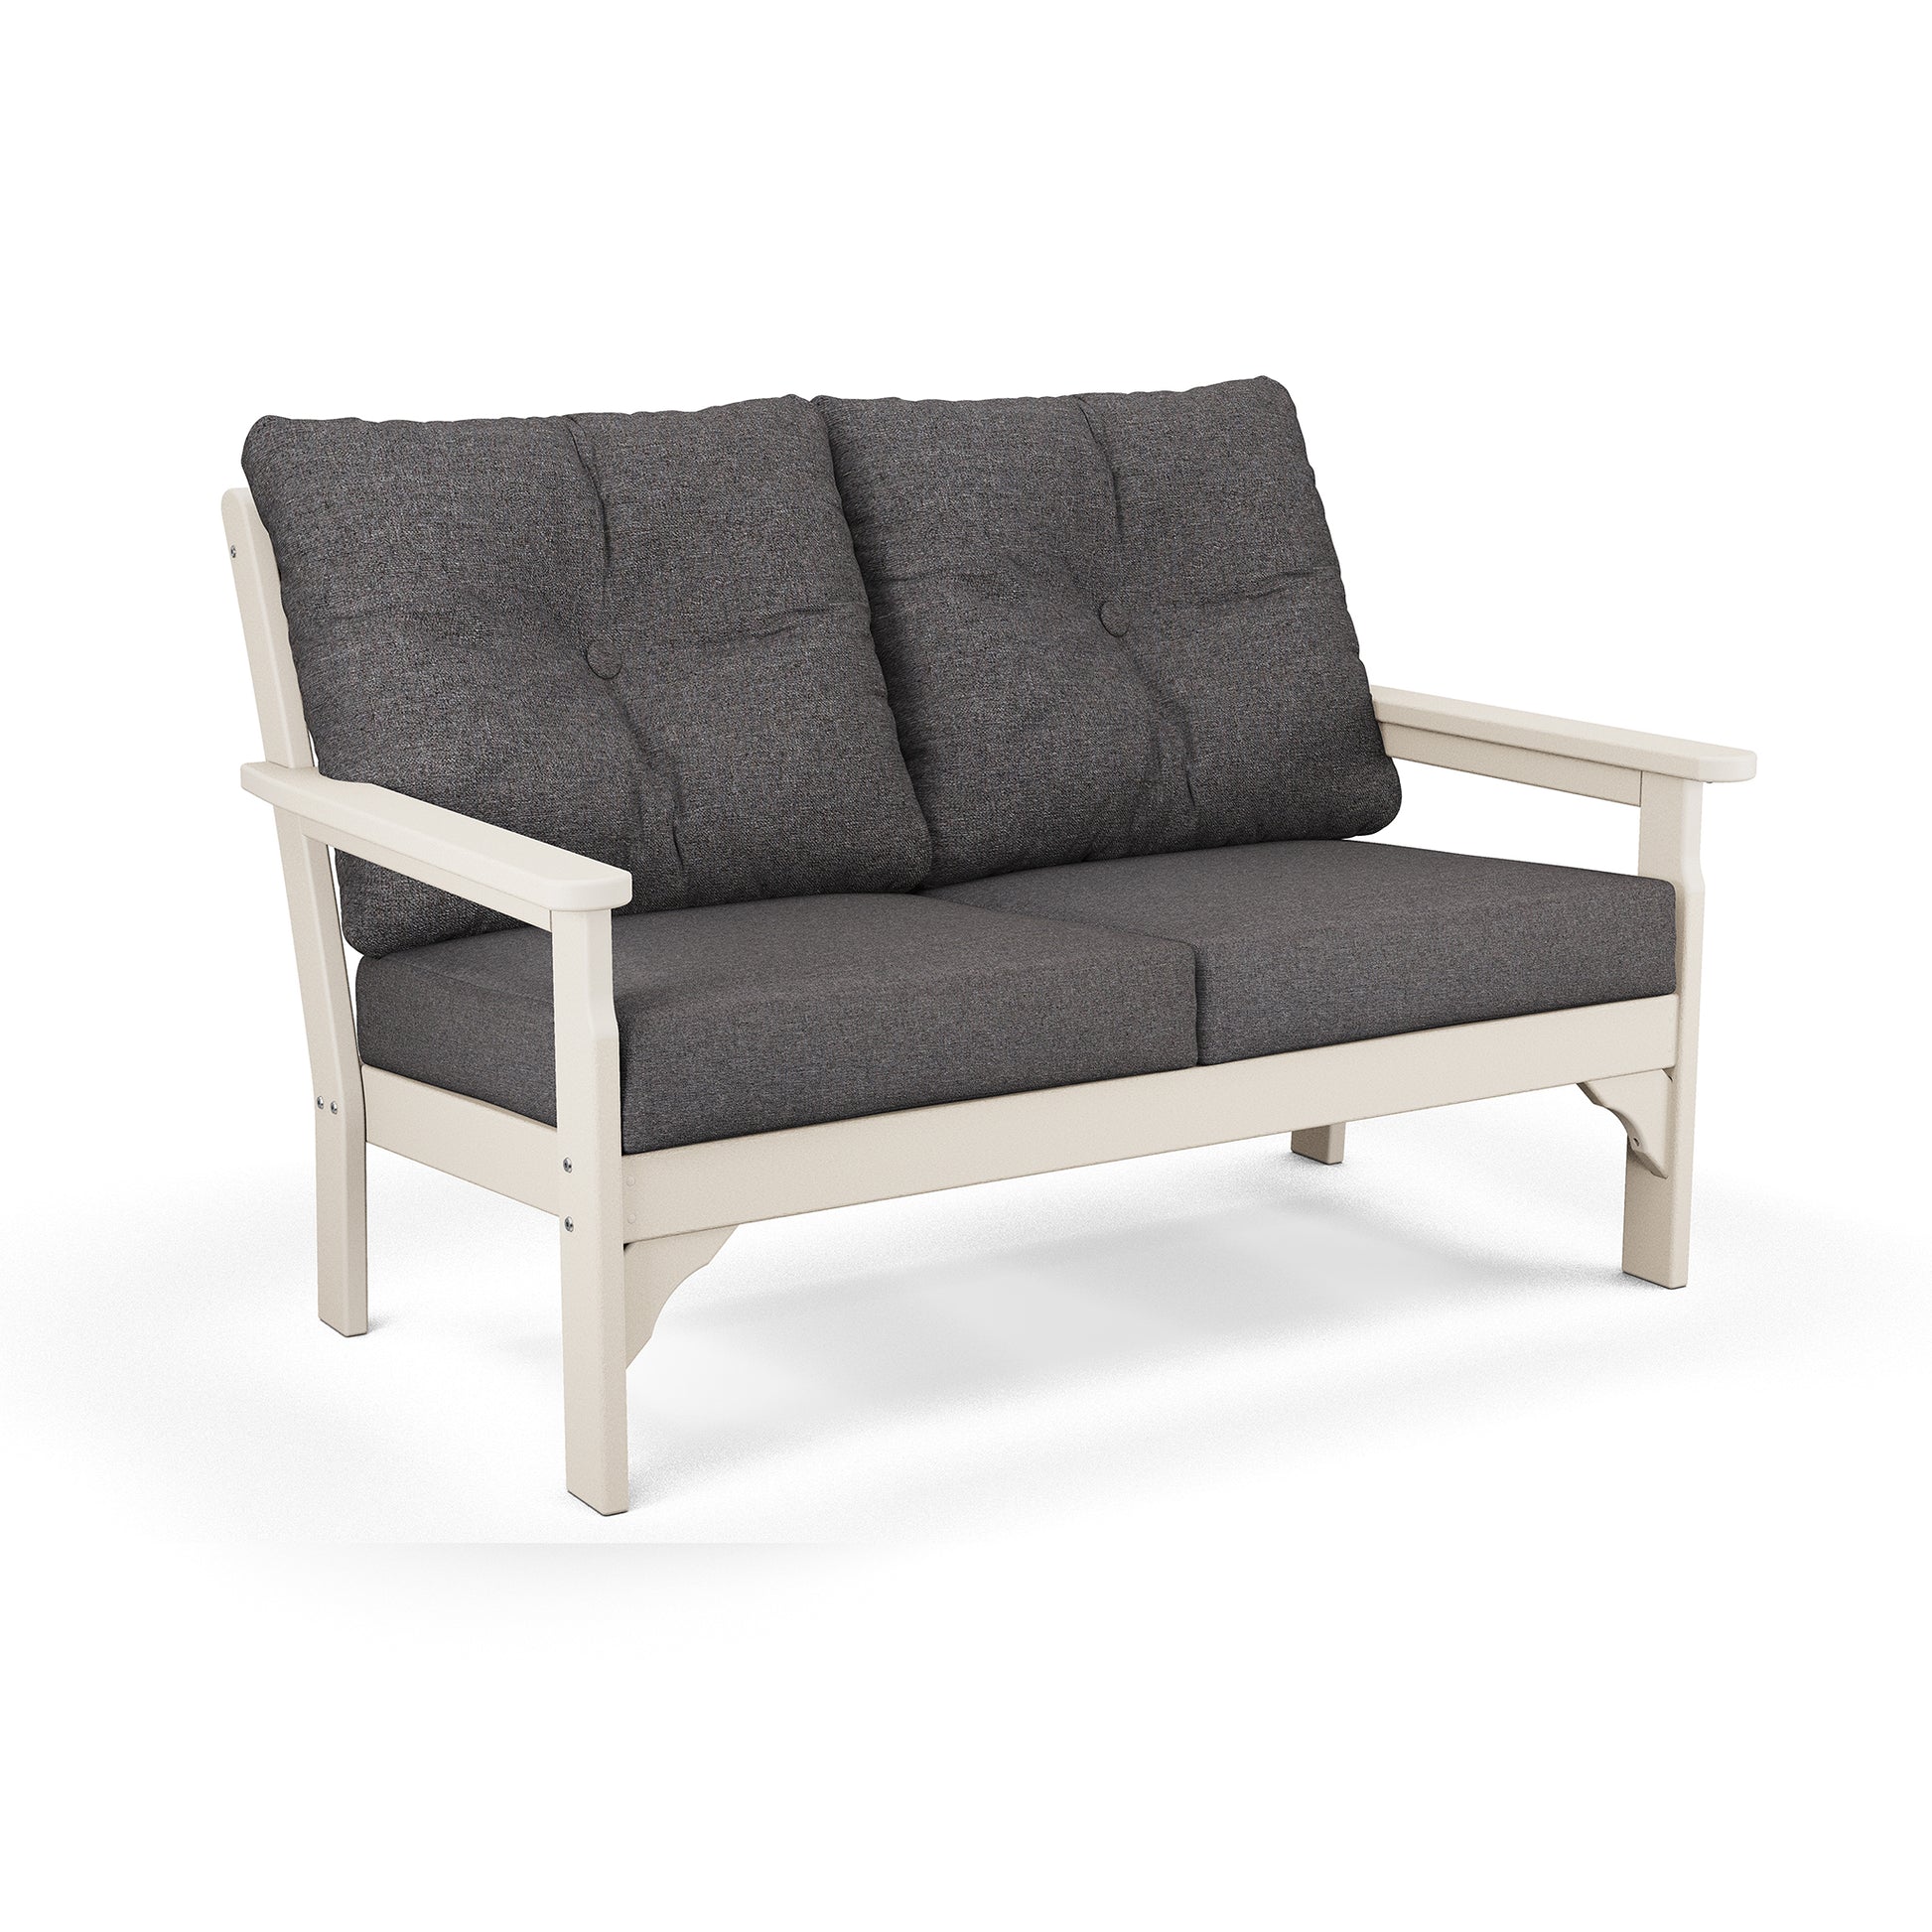 A two-seater sofa featuring a white POLYWOOD® Vineyard Deep Seating Settee frame and dark gray weather-resistant cushions, isolated on a white background.